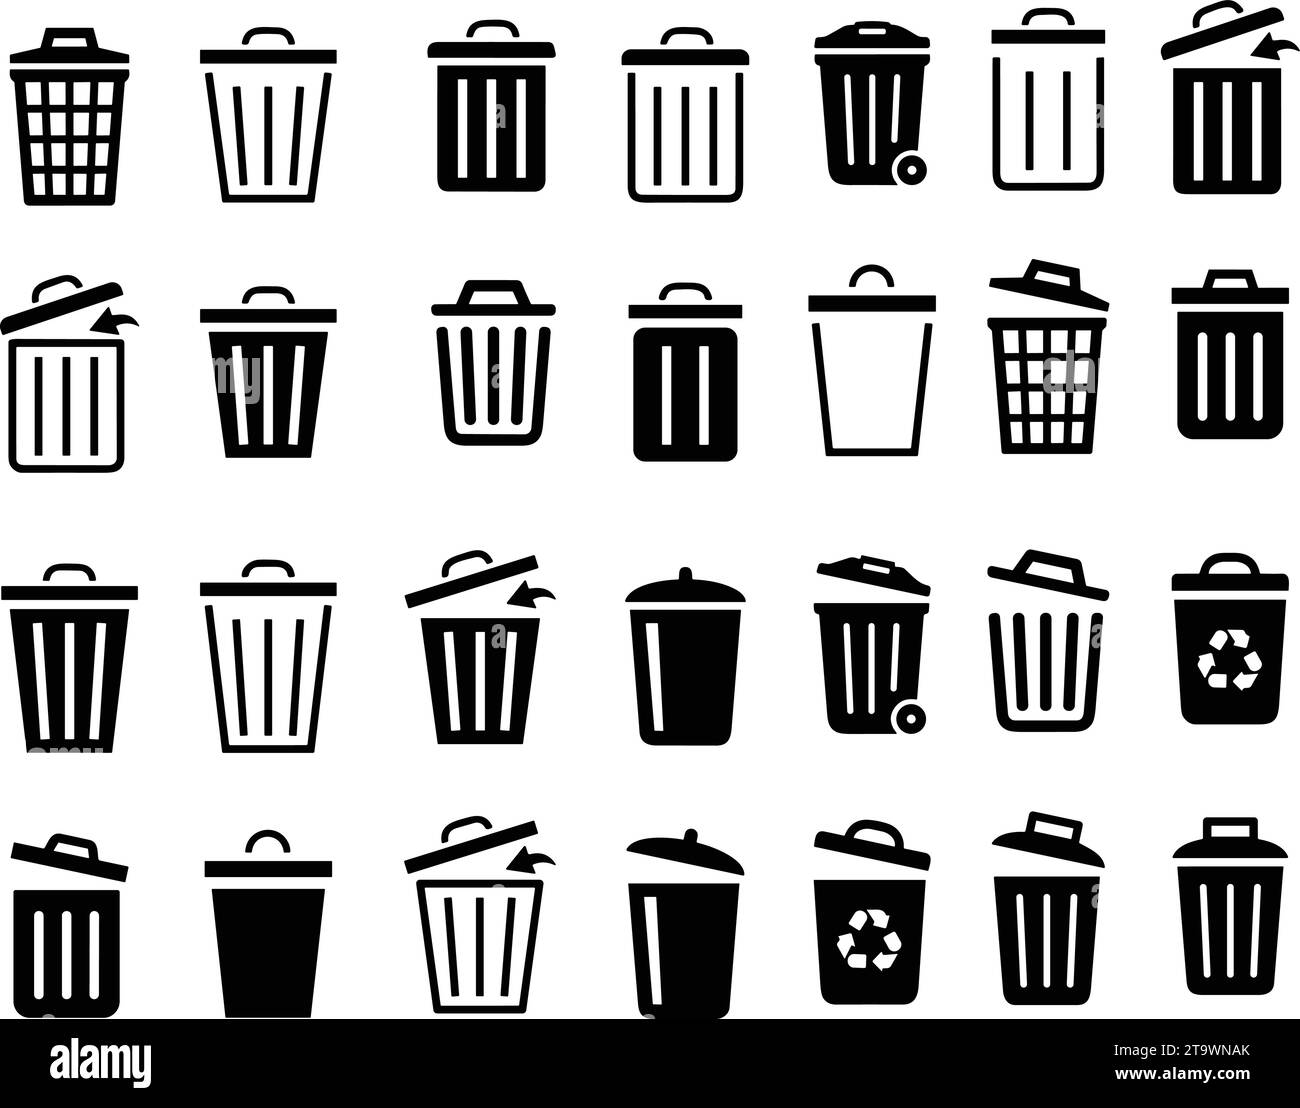 Trash icons set. Dust bin sign collection. Can or delete symbol. Recycle bin icon button. Dustbin icon in trendy flat and line design. wastage or garb Stock Vector